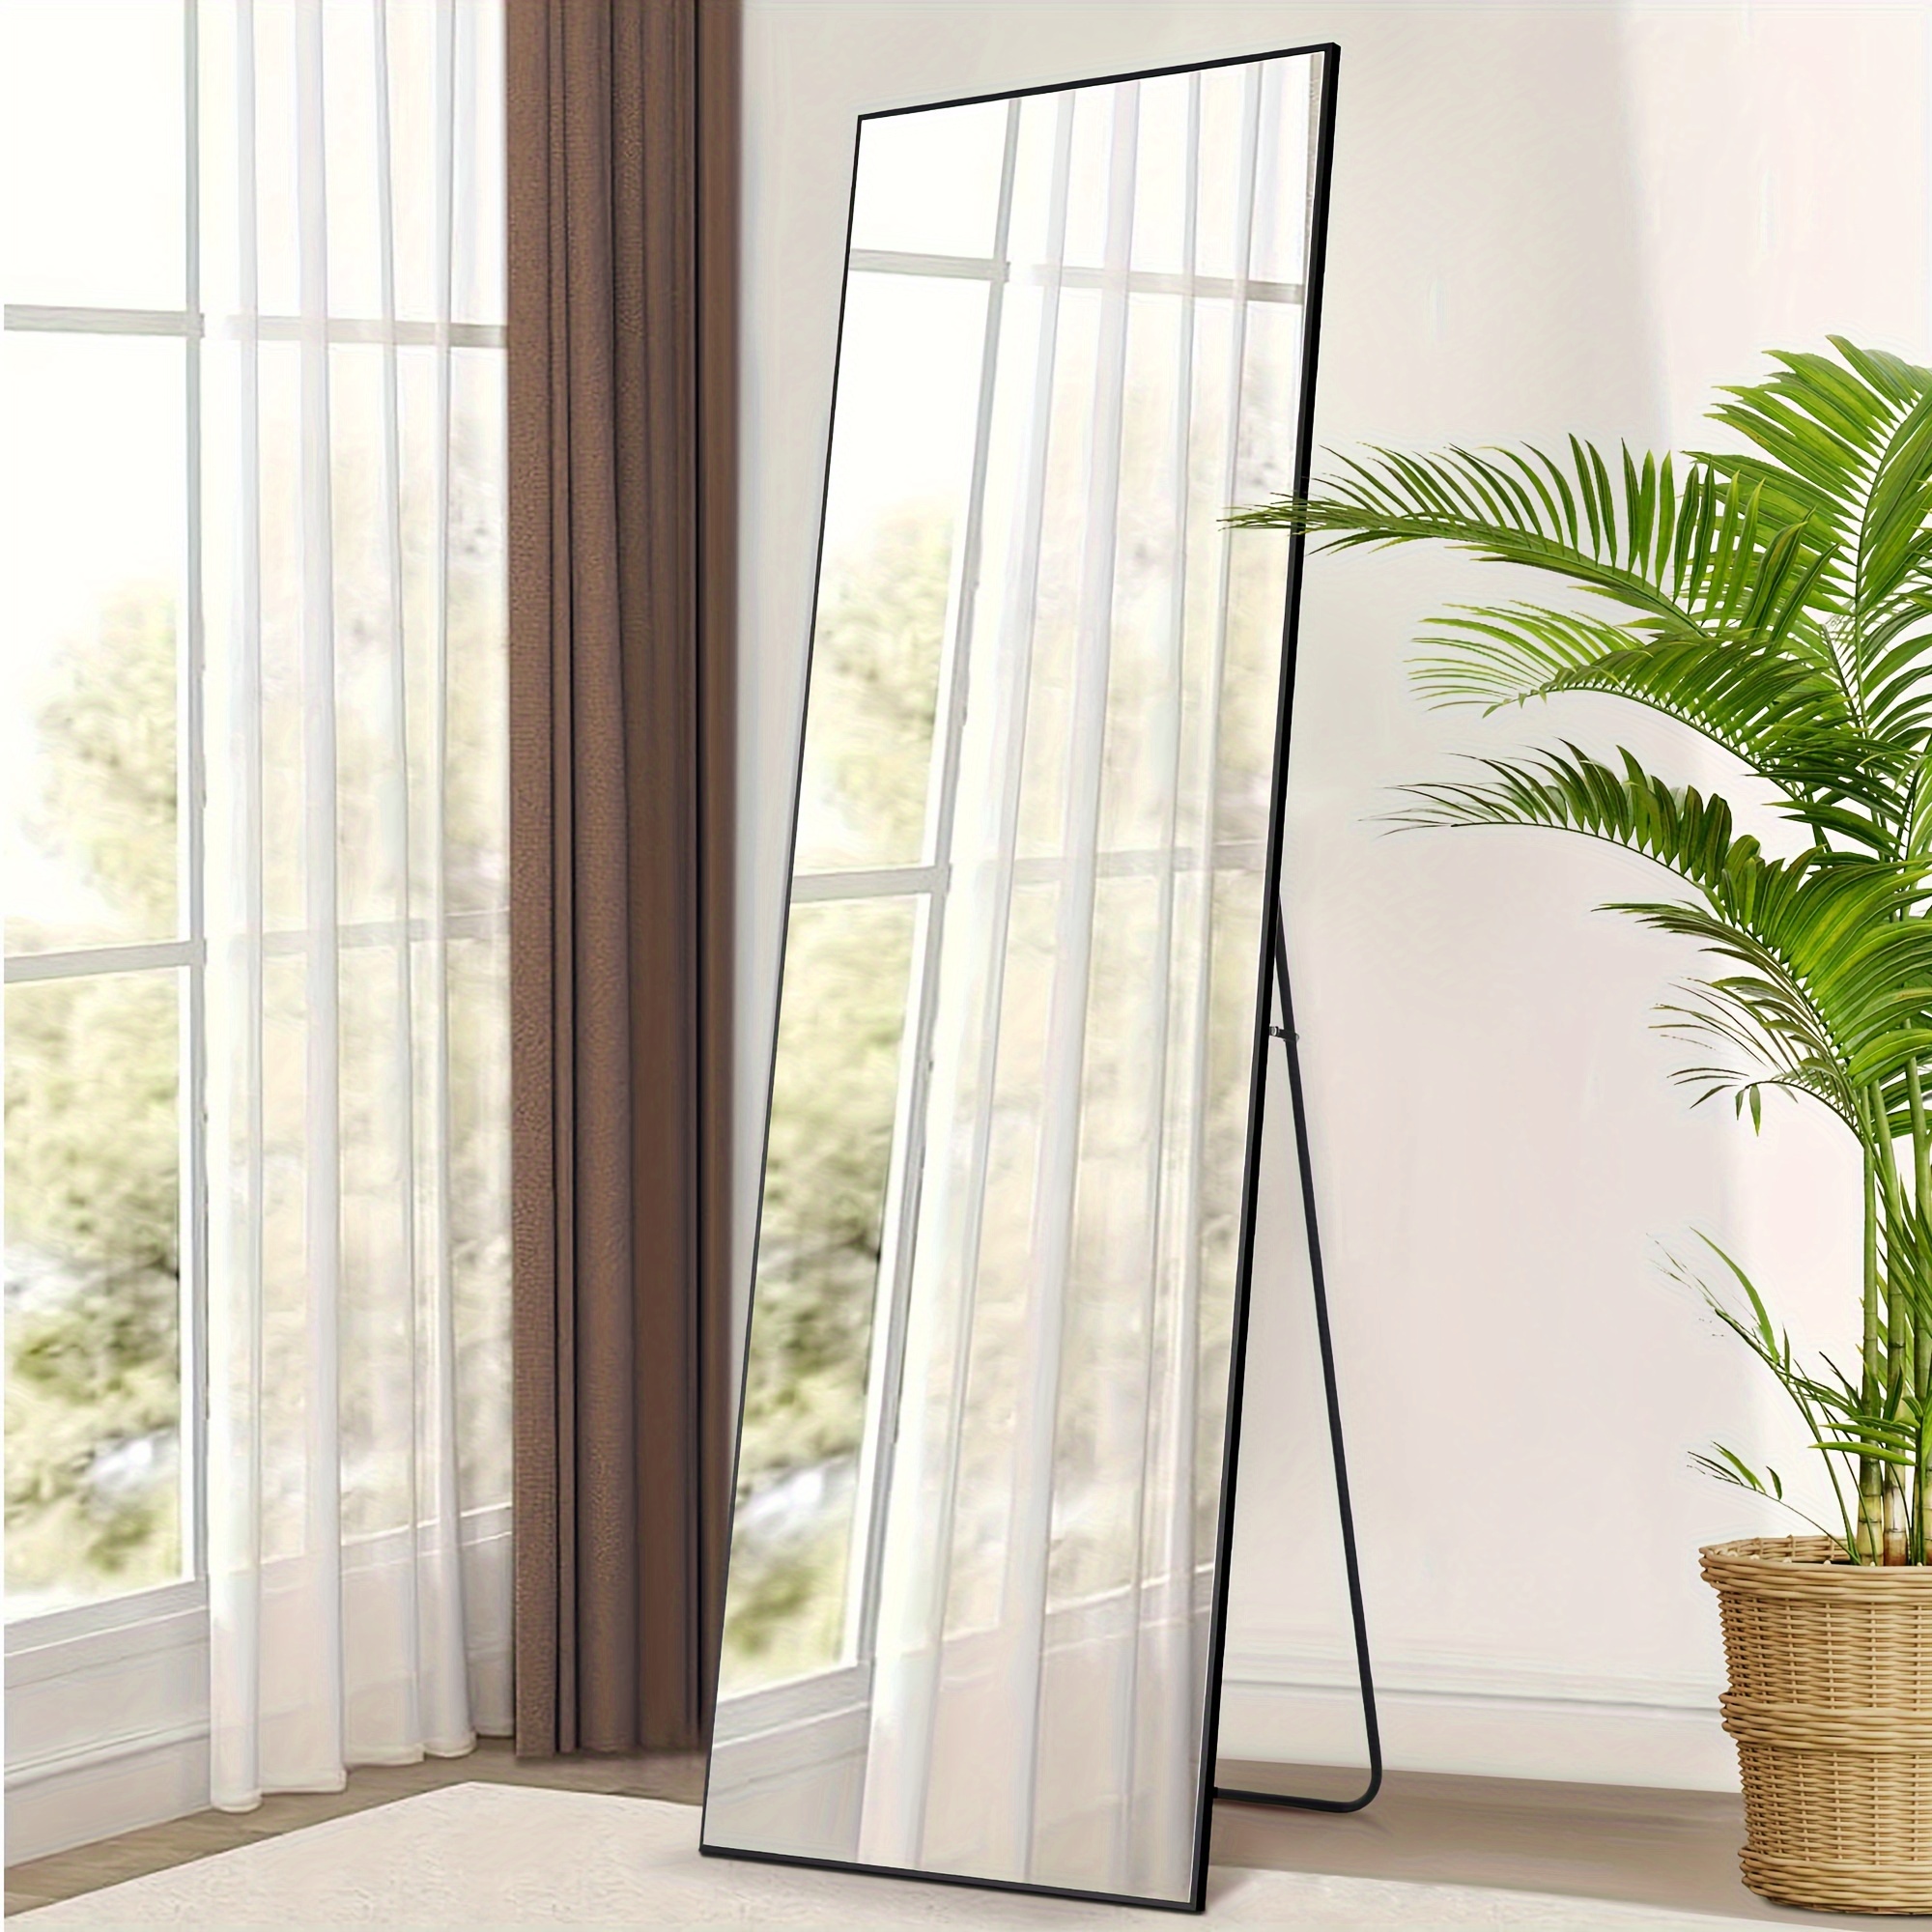 

Mirror Full Length, Full Body Mirror With Stand, Hanging Or Leaning For Wall, Aluminum Alloy Thin Frame Floor Standing For Bedroom, Living Room, Cloakroom, Tall, 59 X 16 Inch/ 64 X 21 Inch